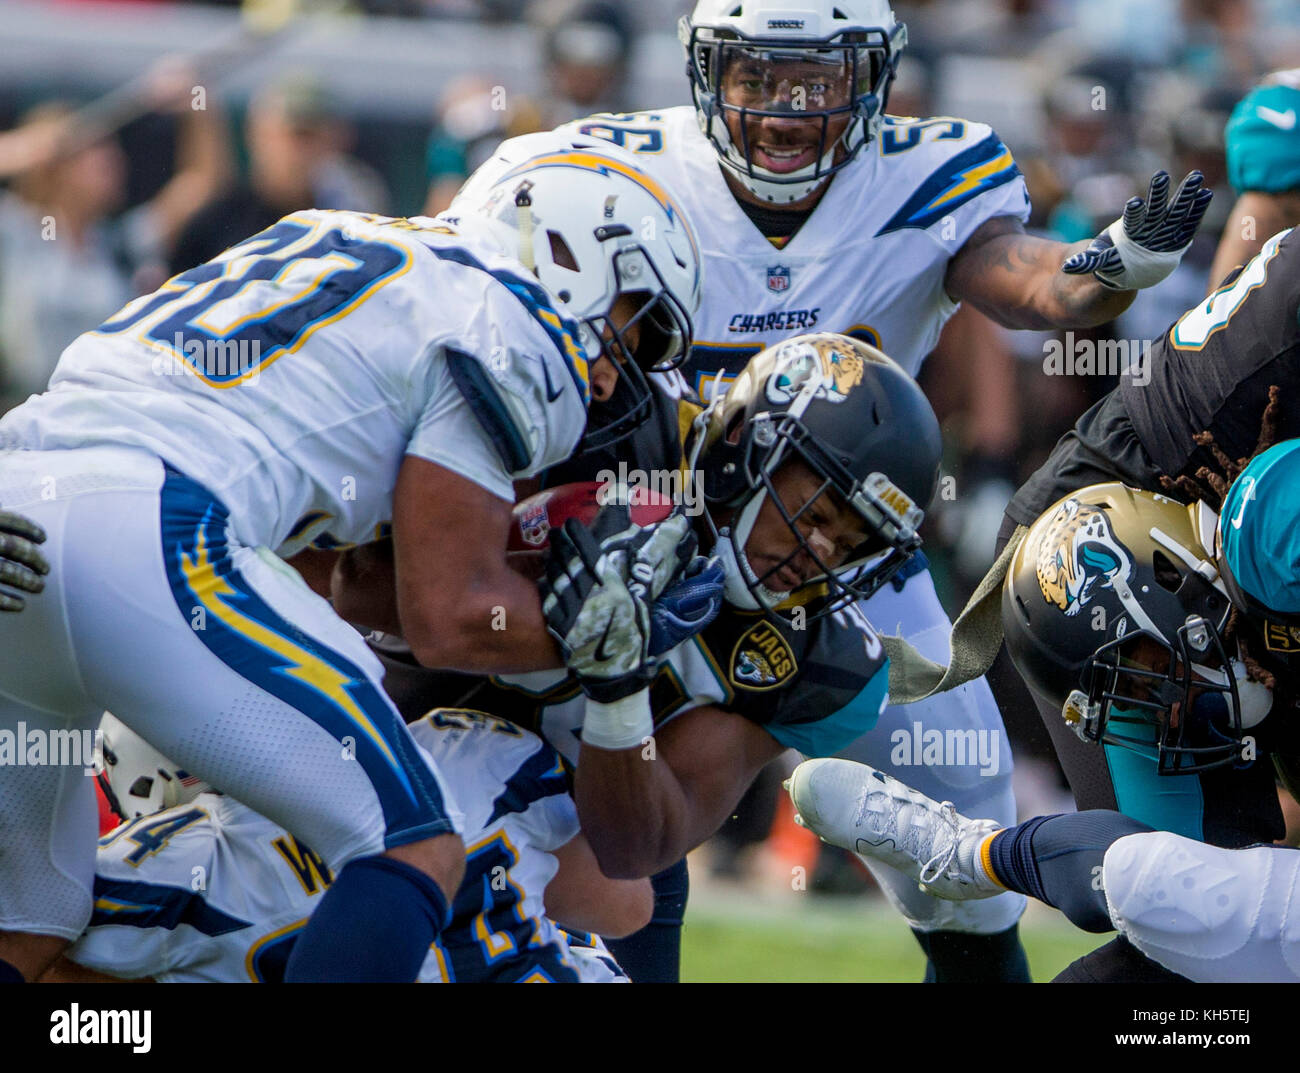 Jacksonville, FL, USA. 12th Nov, 2017. Jacksonville Jaguars running back Corey Grant (30) is tackled by Los Angeles Chargers defensive back Desmond King (20) and .Los Angeles Chargers running back Austin Ekeler (30) during the NFL football game between the Los Angeles Chargers and the Jacksonville Jaguars at EverBank Field in Jacksonville, FL. Jacksonville defeated Los Angeles 20-17 in overtime Robert John Herbert/CSM/Alamy Live News Stock Photo